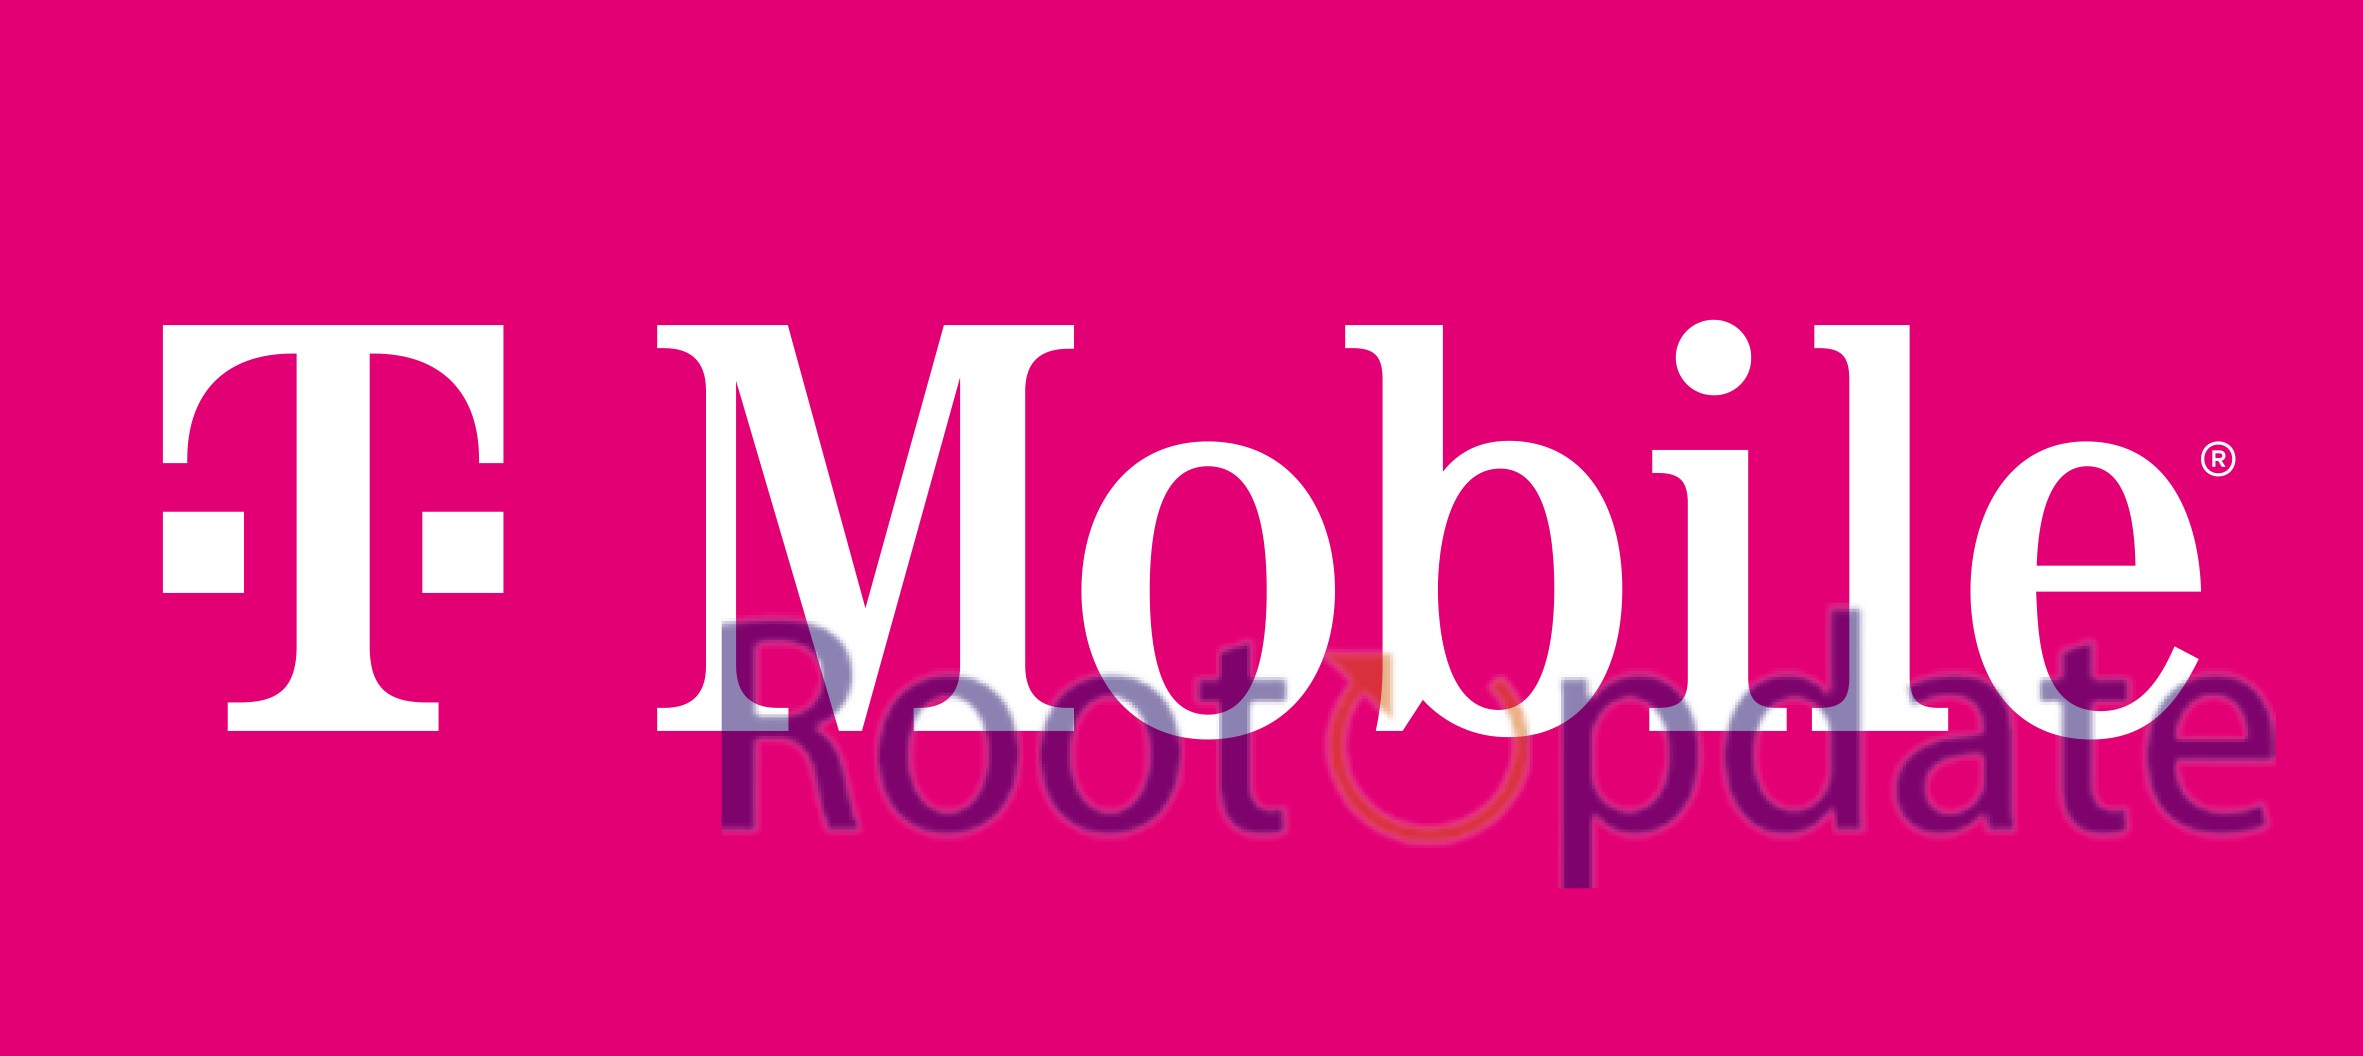 Opt Out Of Forced T-Mobile Migration Plans